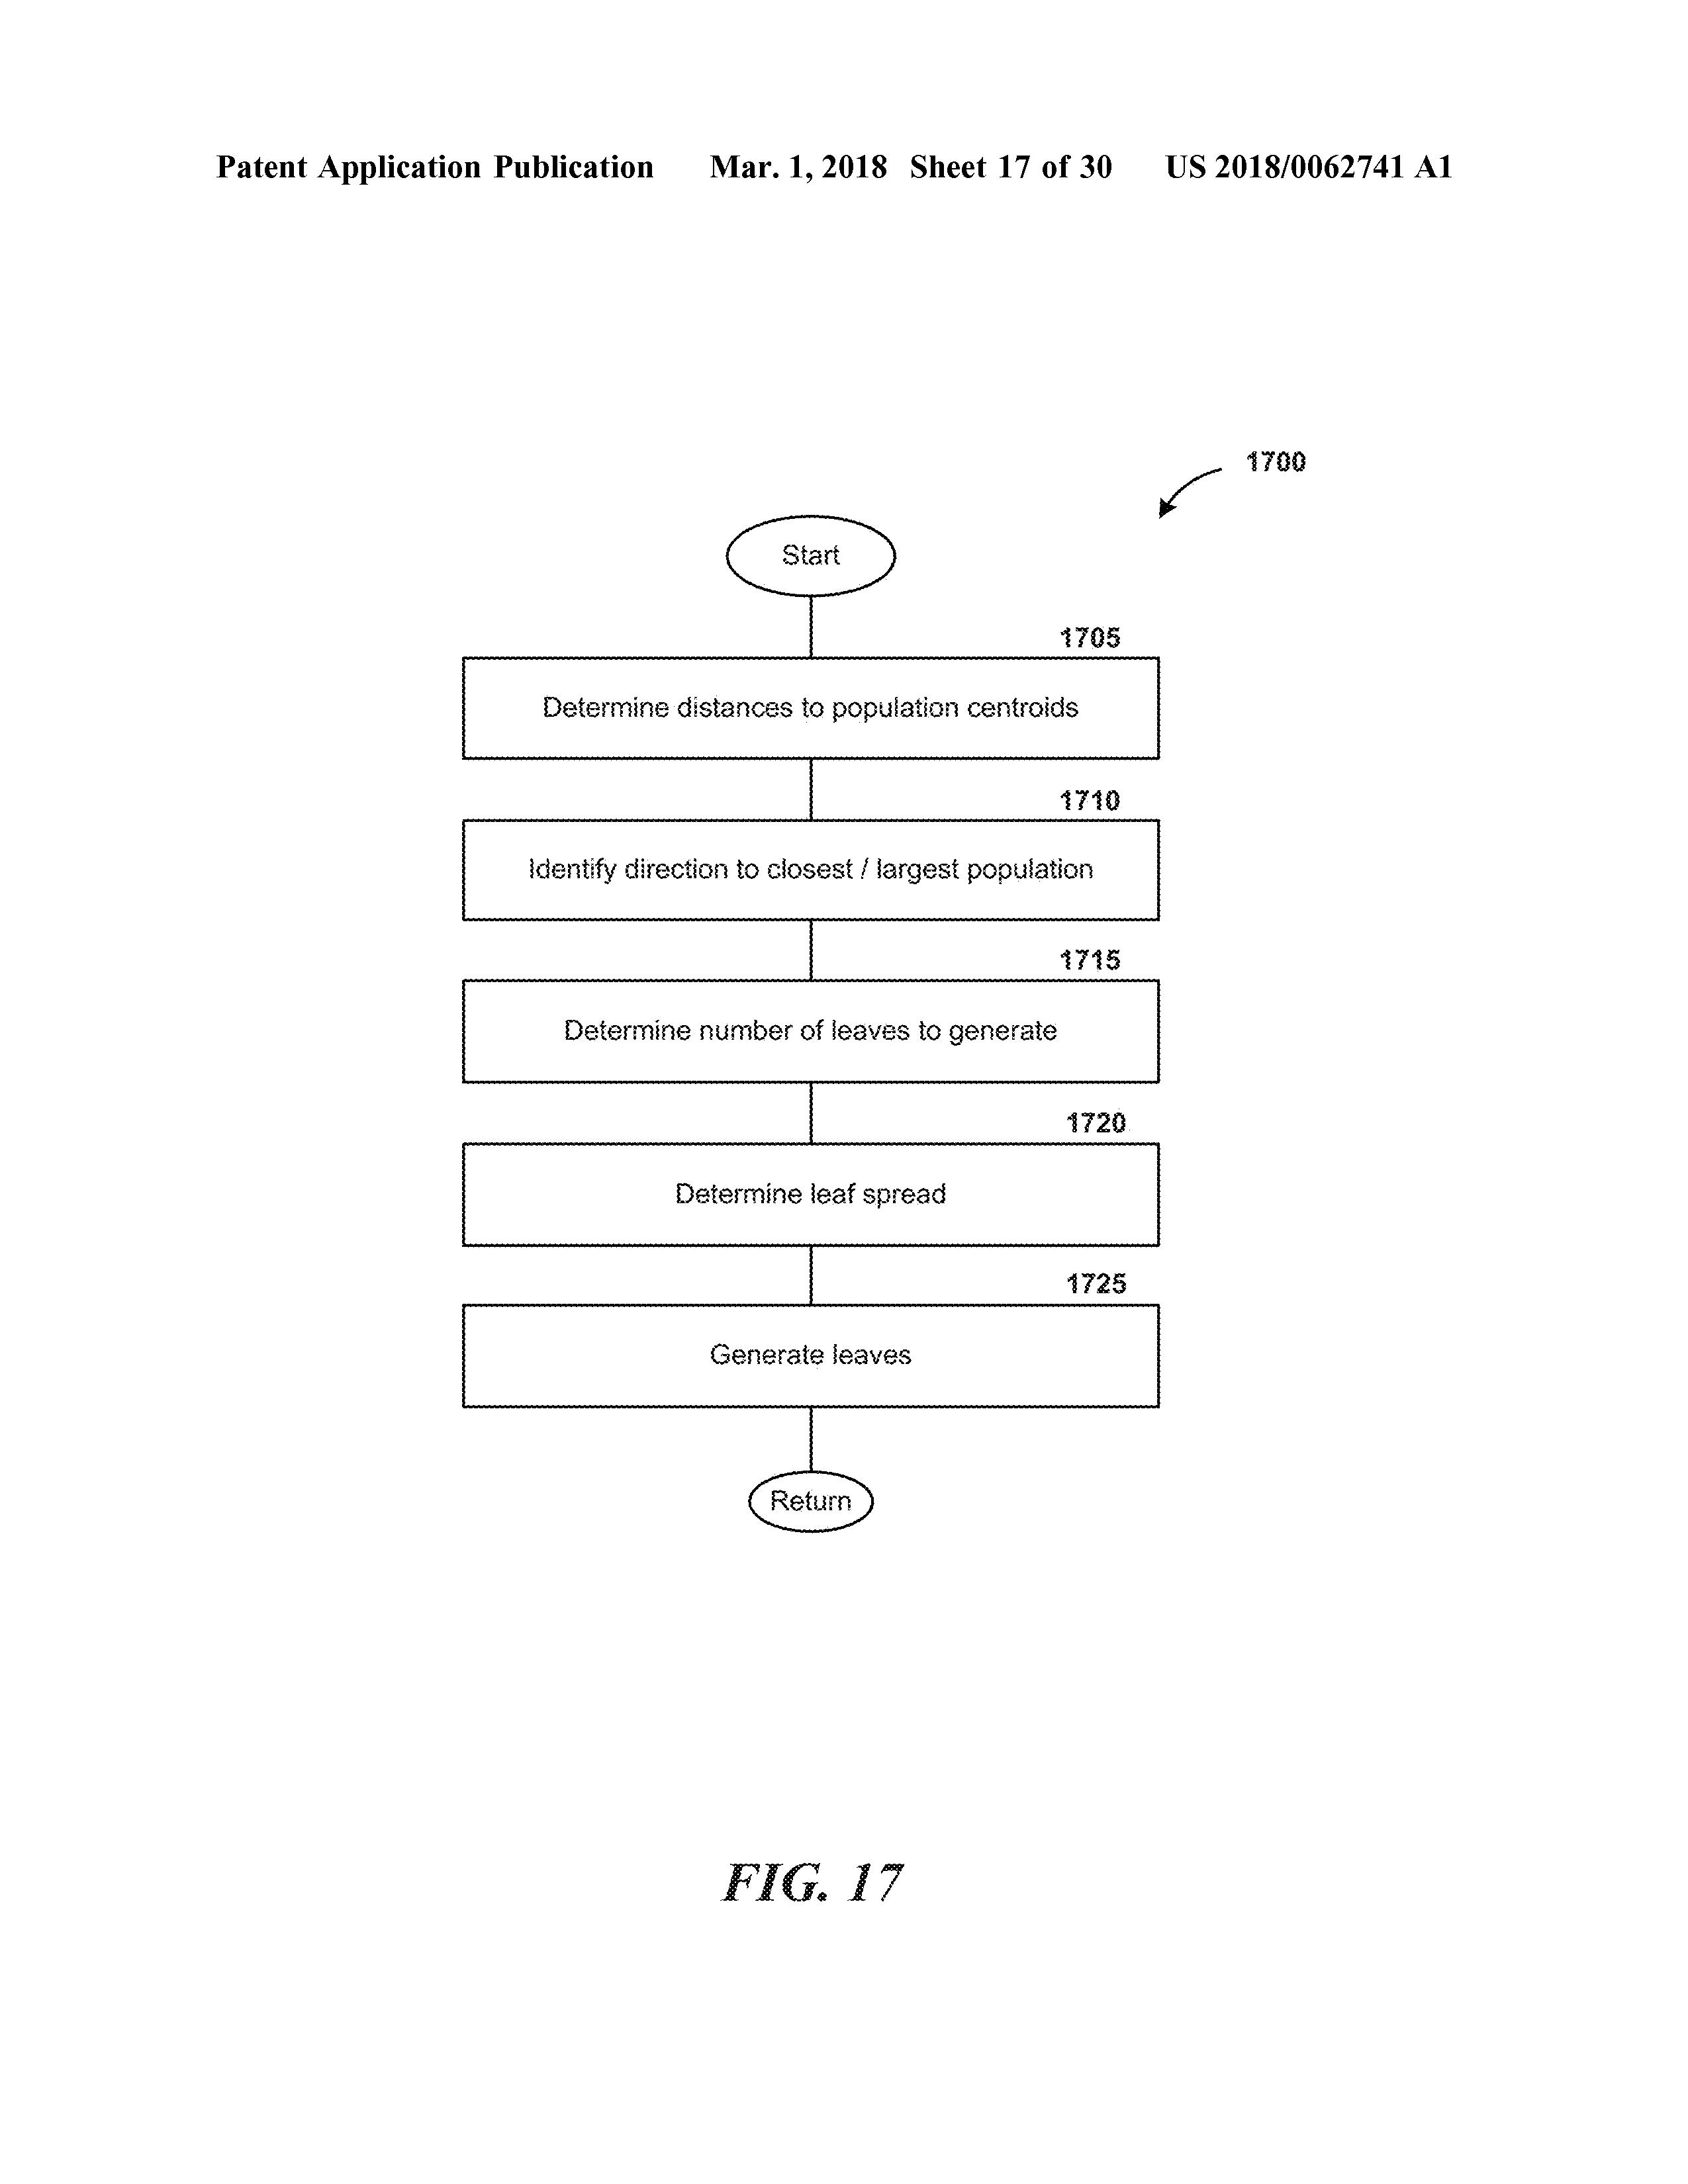 US20180062741A1 ALIGHNMENT IN LINE-OF-SIGHT COMMUNICATION NETWORKS